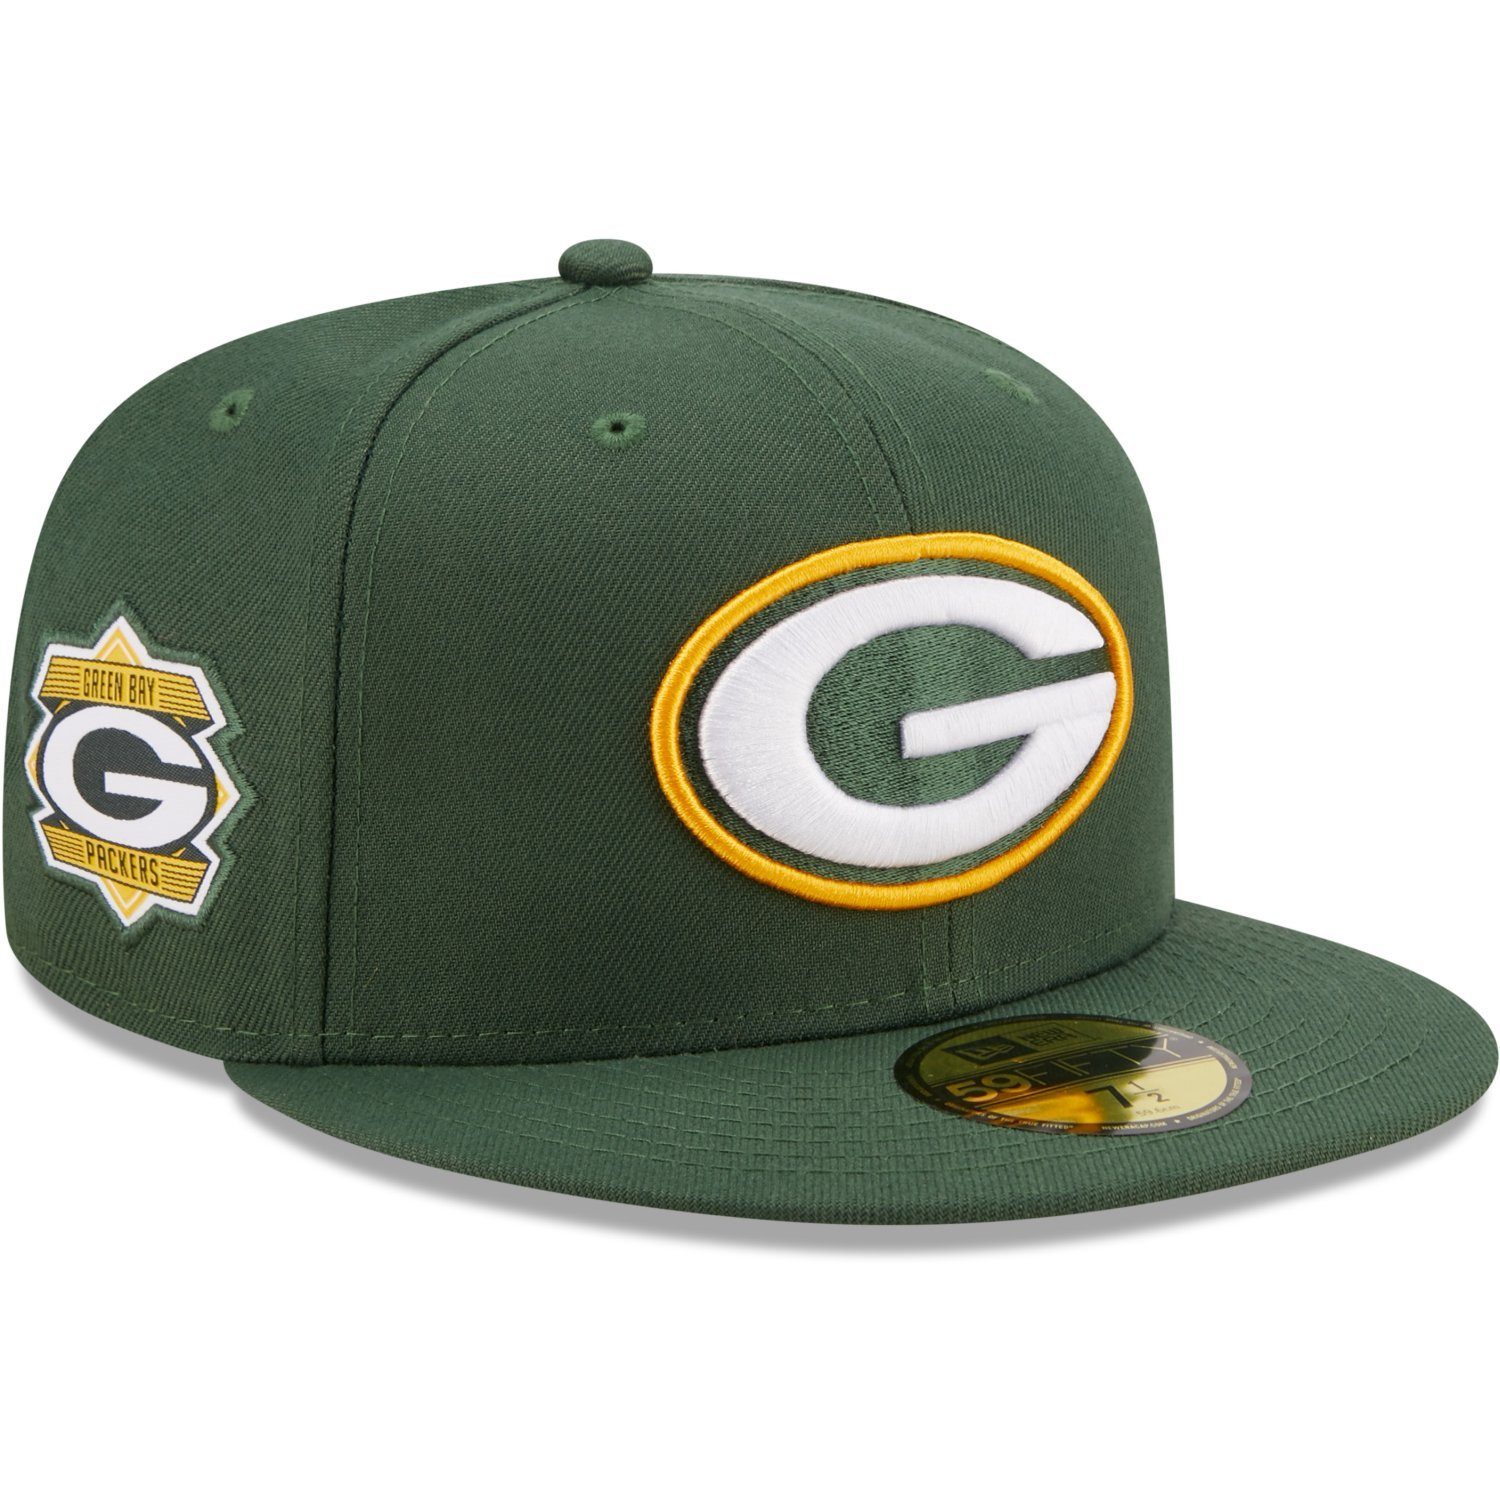 New Era Fitted Cap 59Fifty SIDE PATCH Green Bay Packers